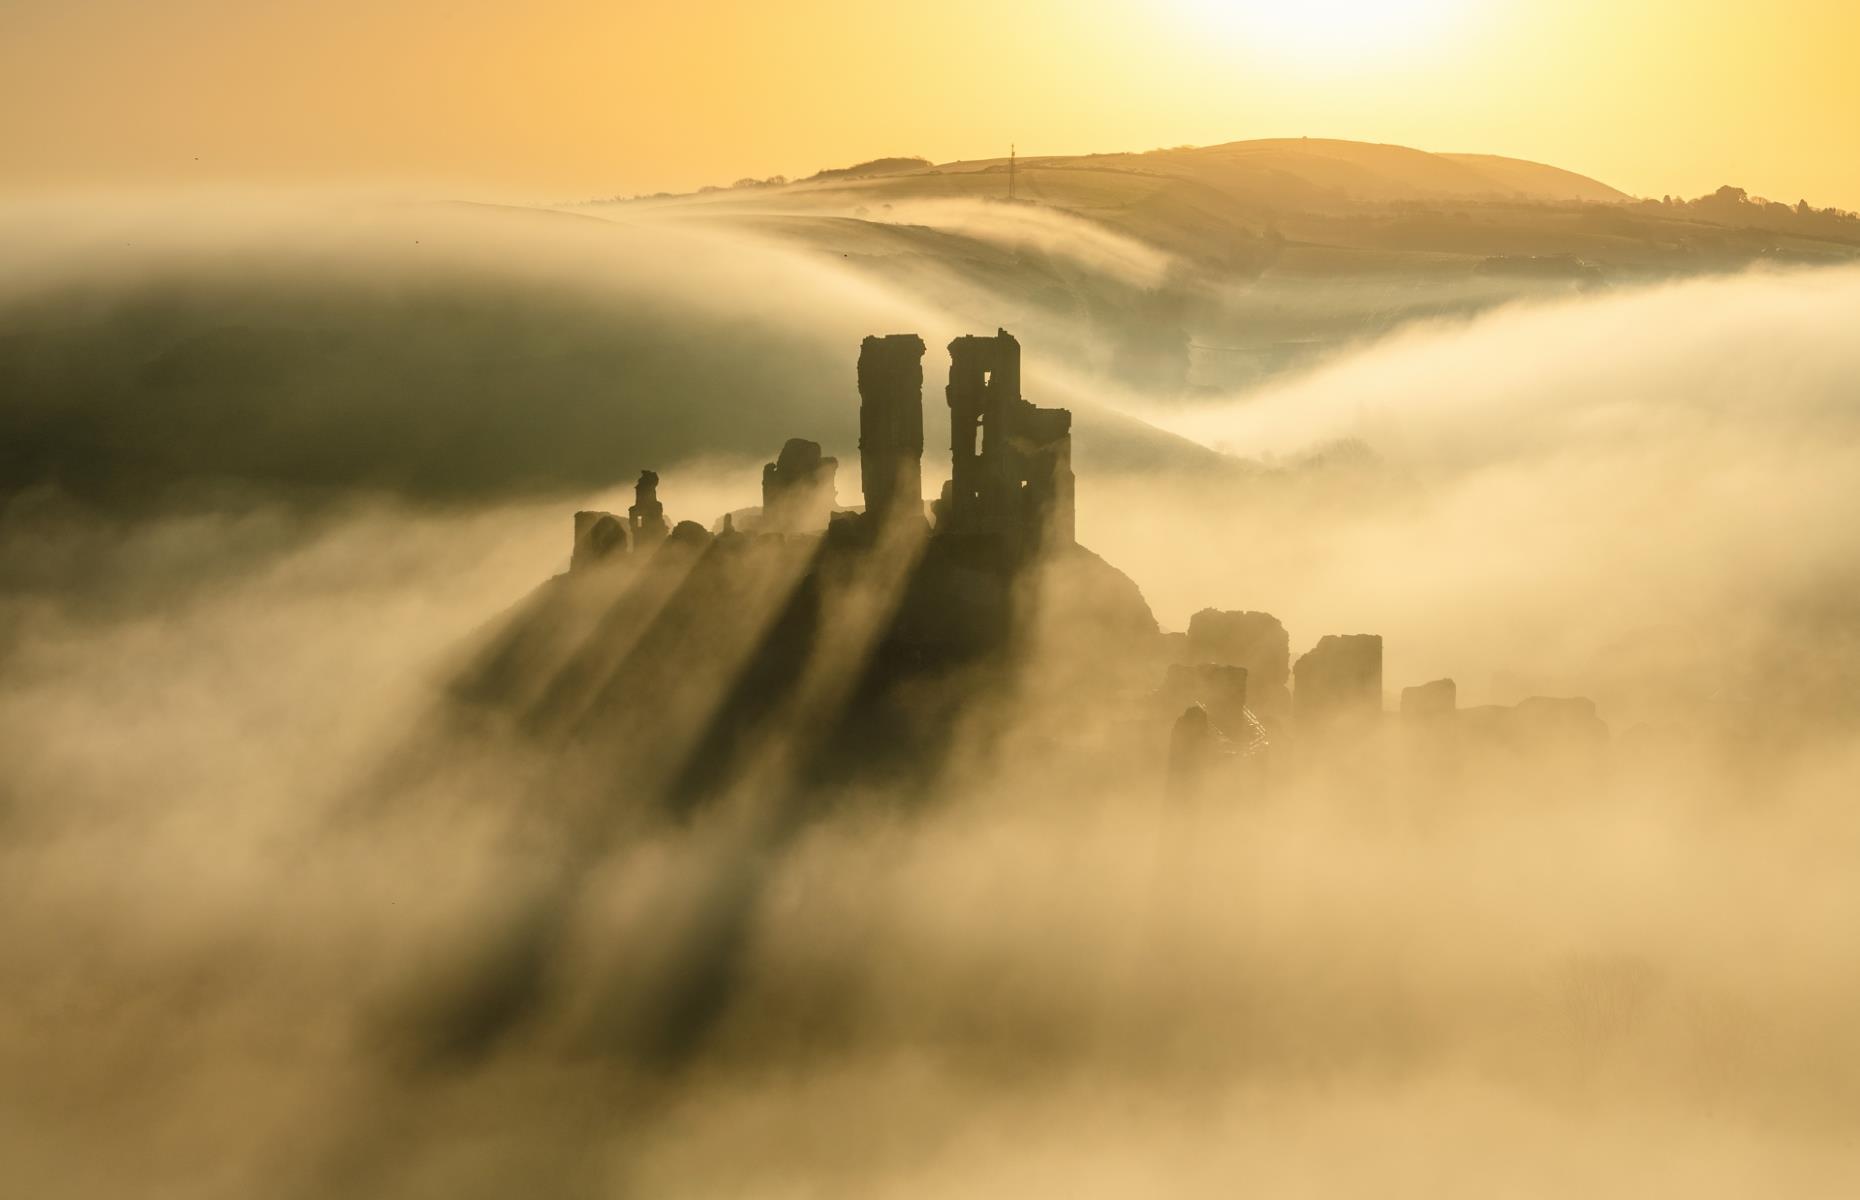 From crumbling ruins peeking through the fog, to higgledy-piggledy cobbled streets and majestic ancient castles, these spellbinding images show off the beauty of some of the world’s most historic places. These photos were originally the shortlisted entries in the Historic Photographer of the Year Awards 2022, run by History Hit in partnership with Historic England. Here, we’ve included our favorite shortlisted and winning entries.